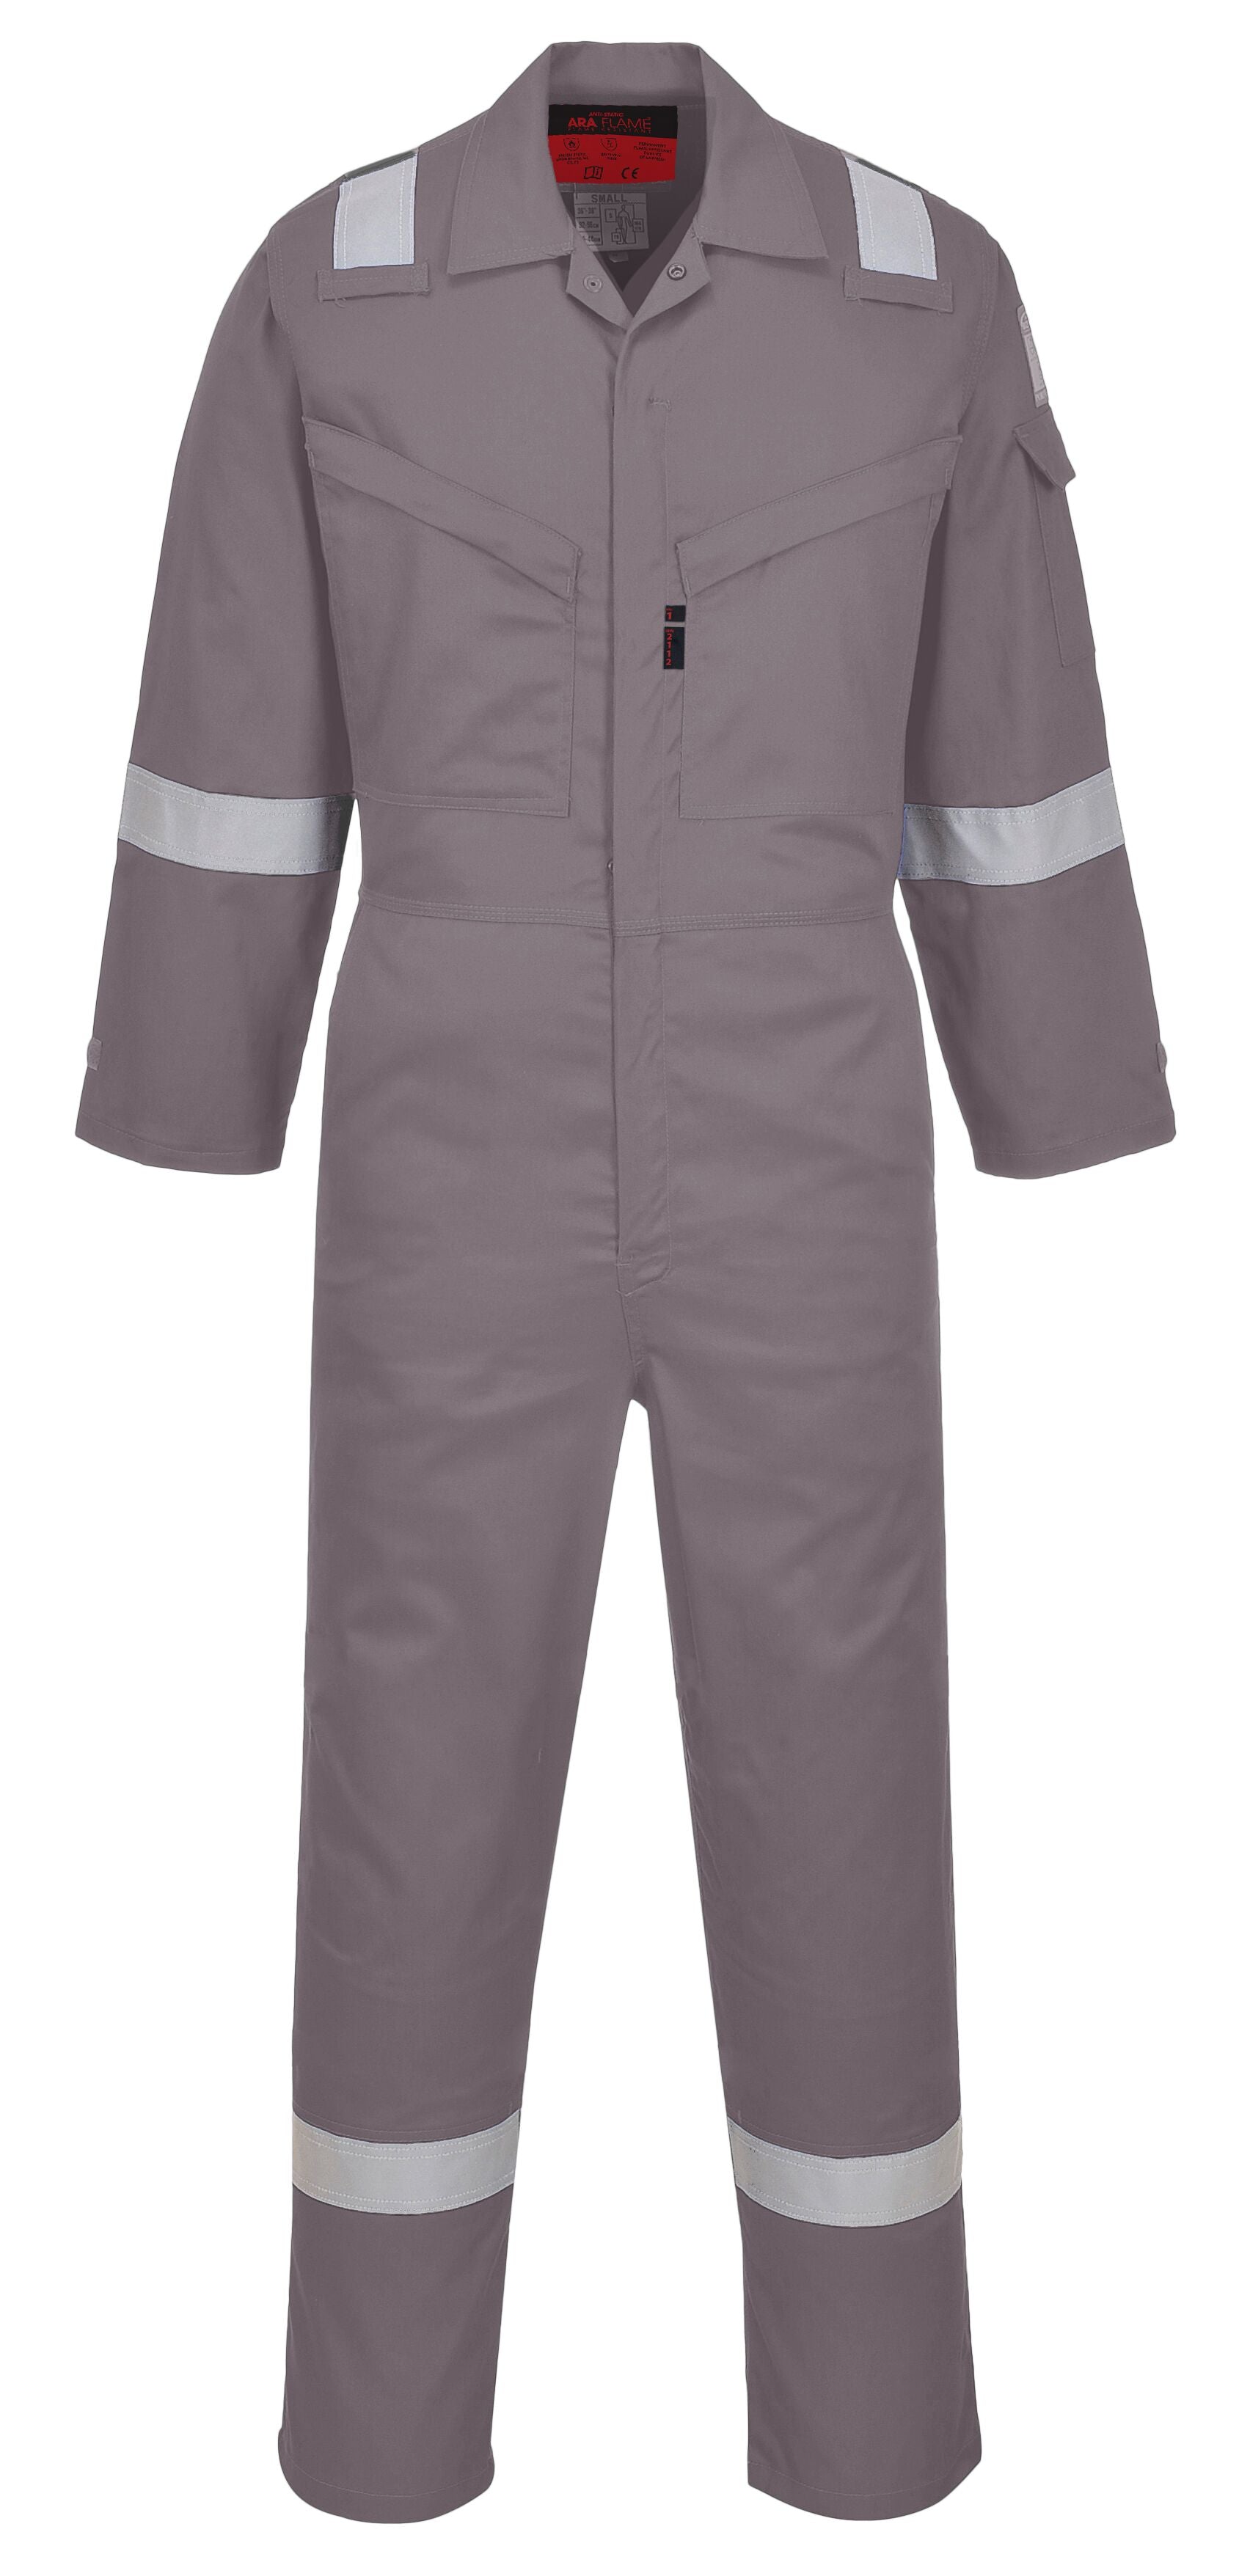 Araflame NFPA 2112 FR Coverall